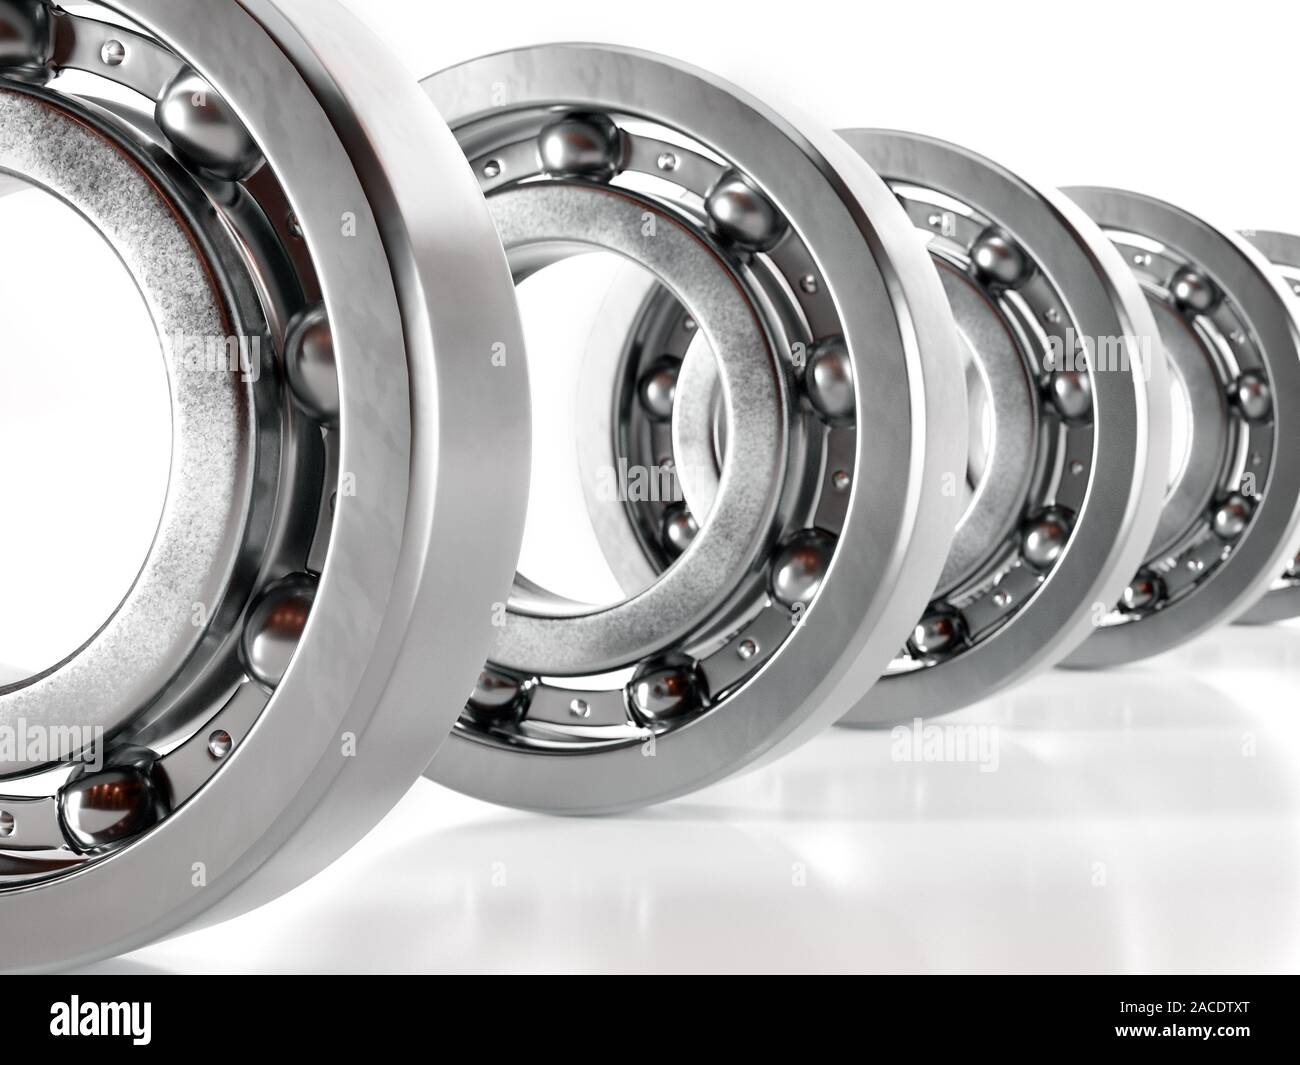 Group of new steel ball bearings on white background Stock Photo